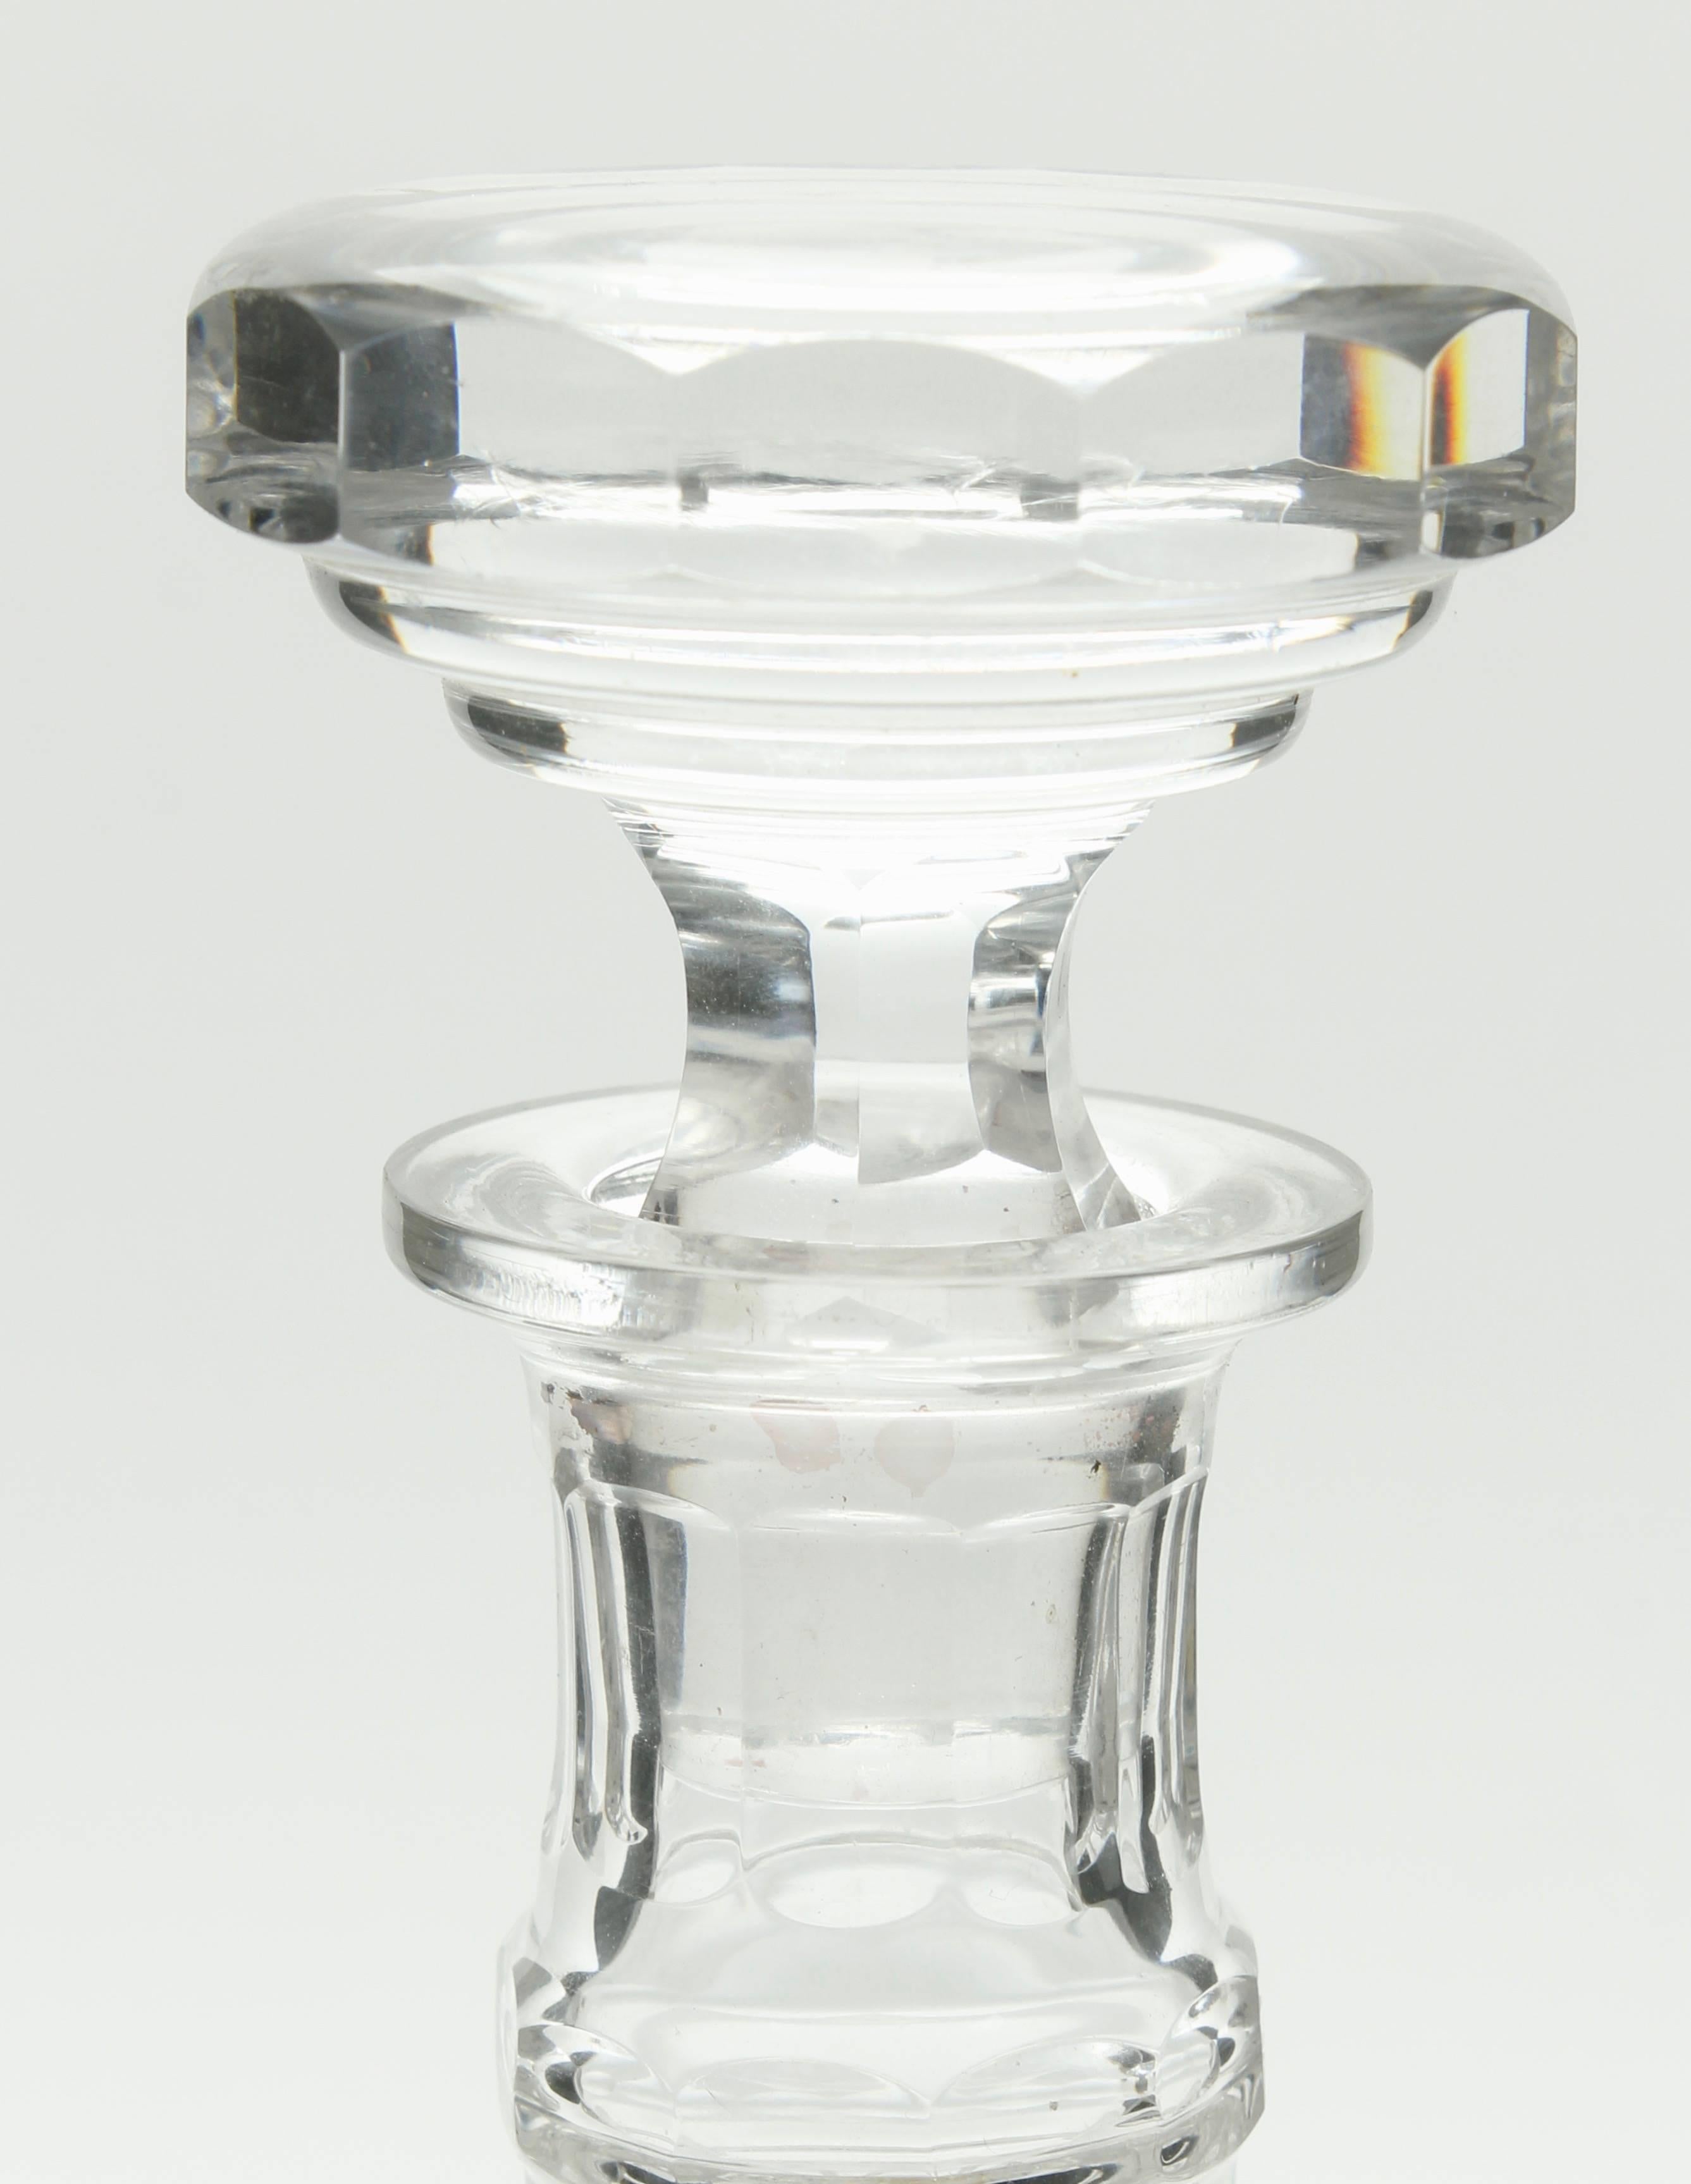 Val Saint Lambert cut-crystal decanter, 20th century
Looks simply stunning.
Val Saint Lambert is a Belgian crystal glassware manufacturer, founded in 1826 and based in Seraing. It is the official glassware supplier to King Albert II. A tall cut and